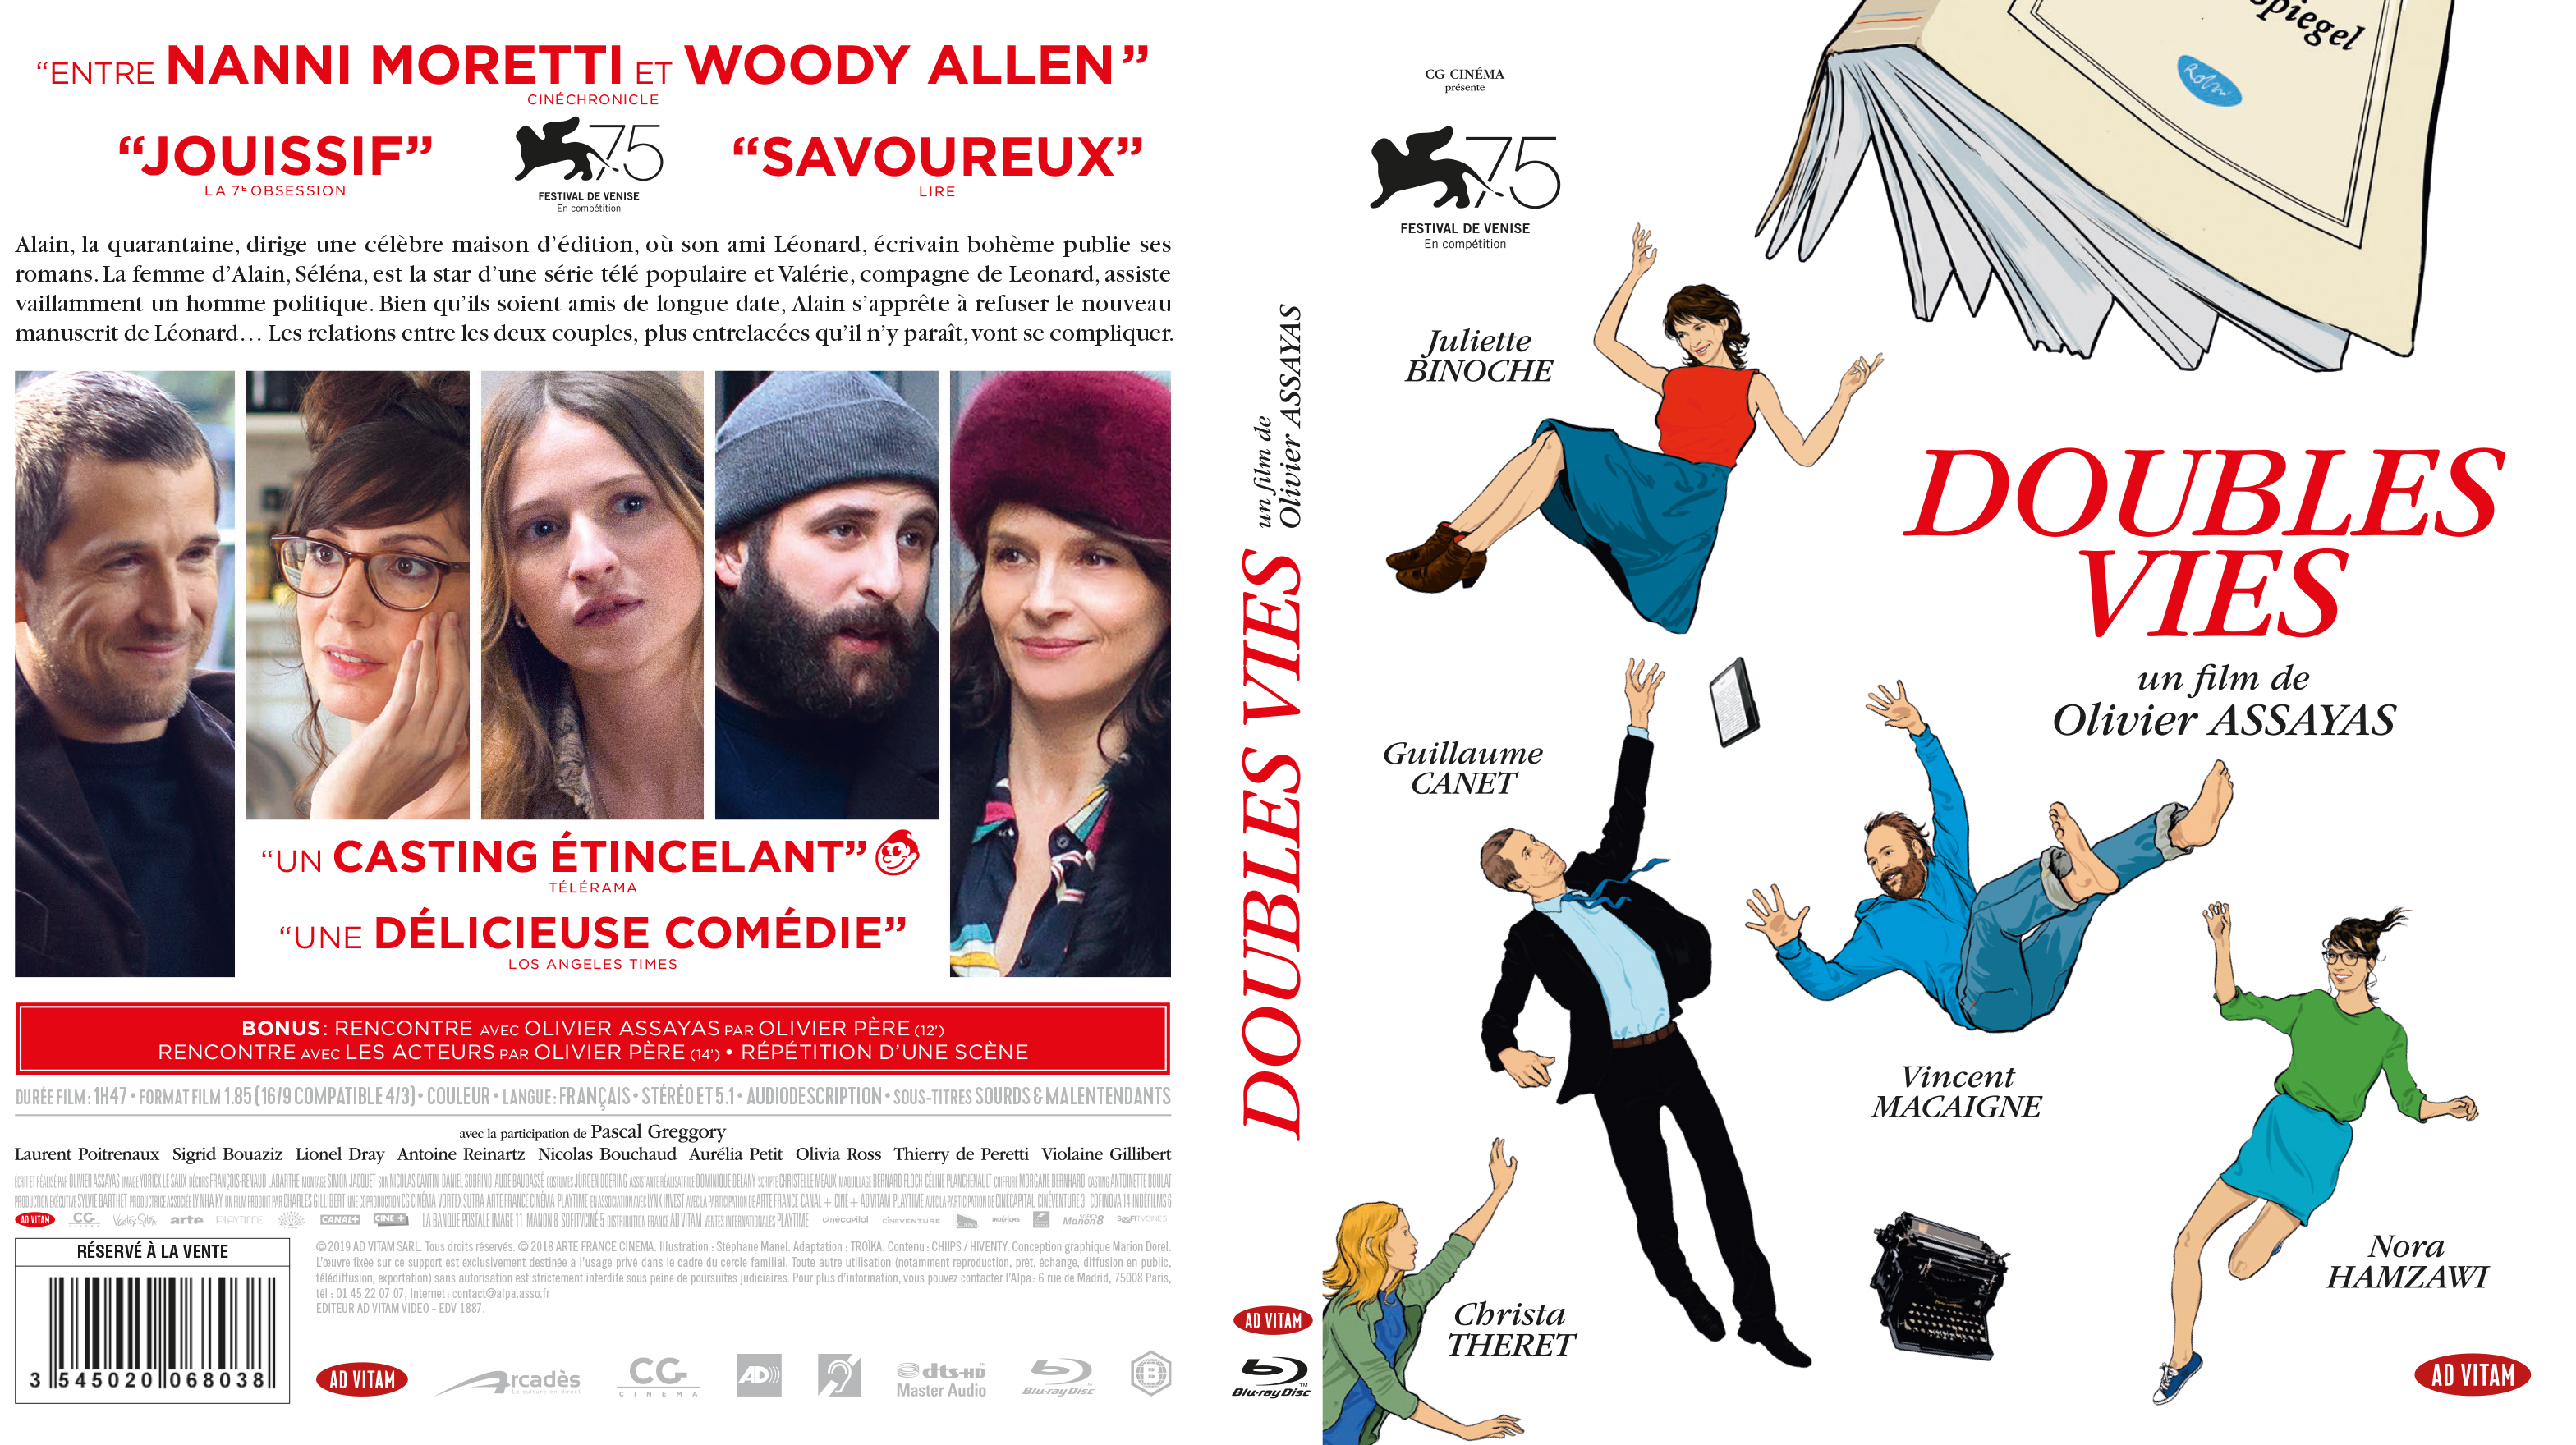 Jaquette DVD Doubles vies (BLU-RAY)